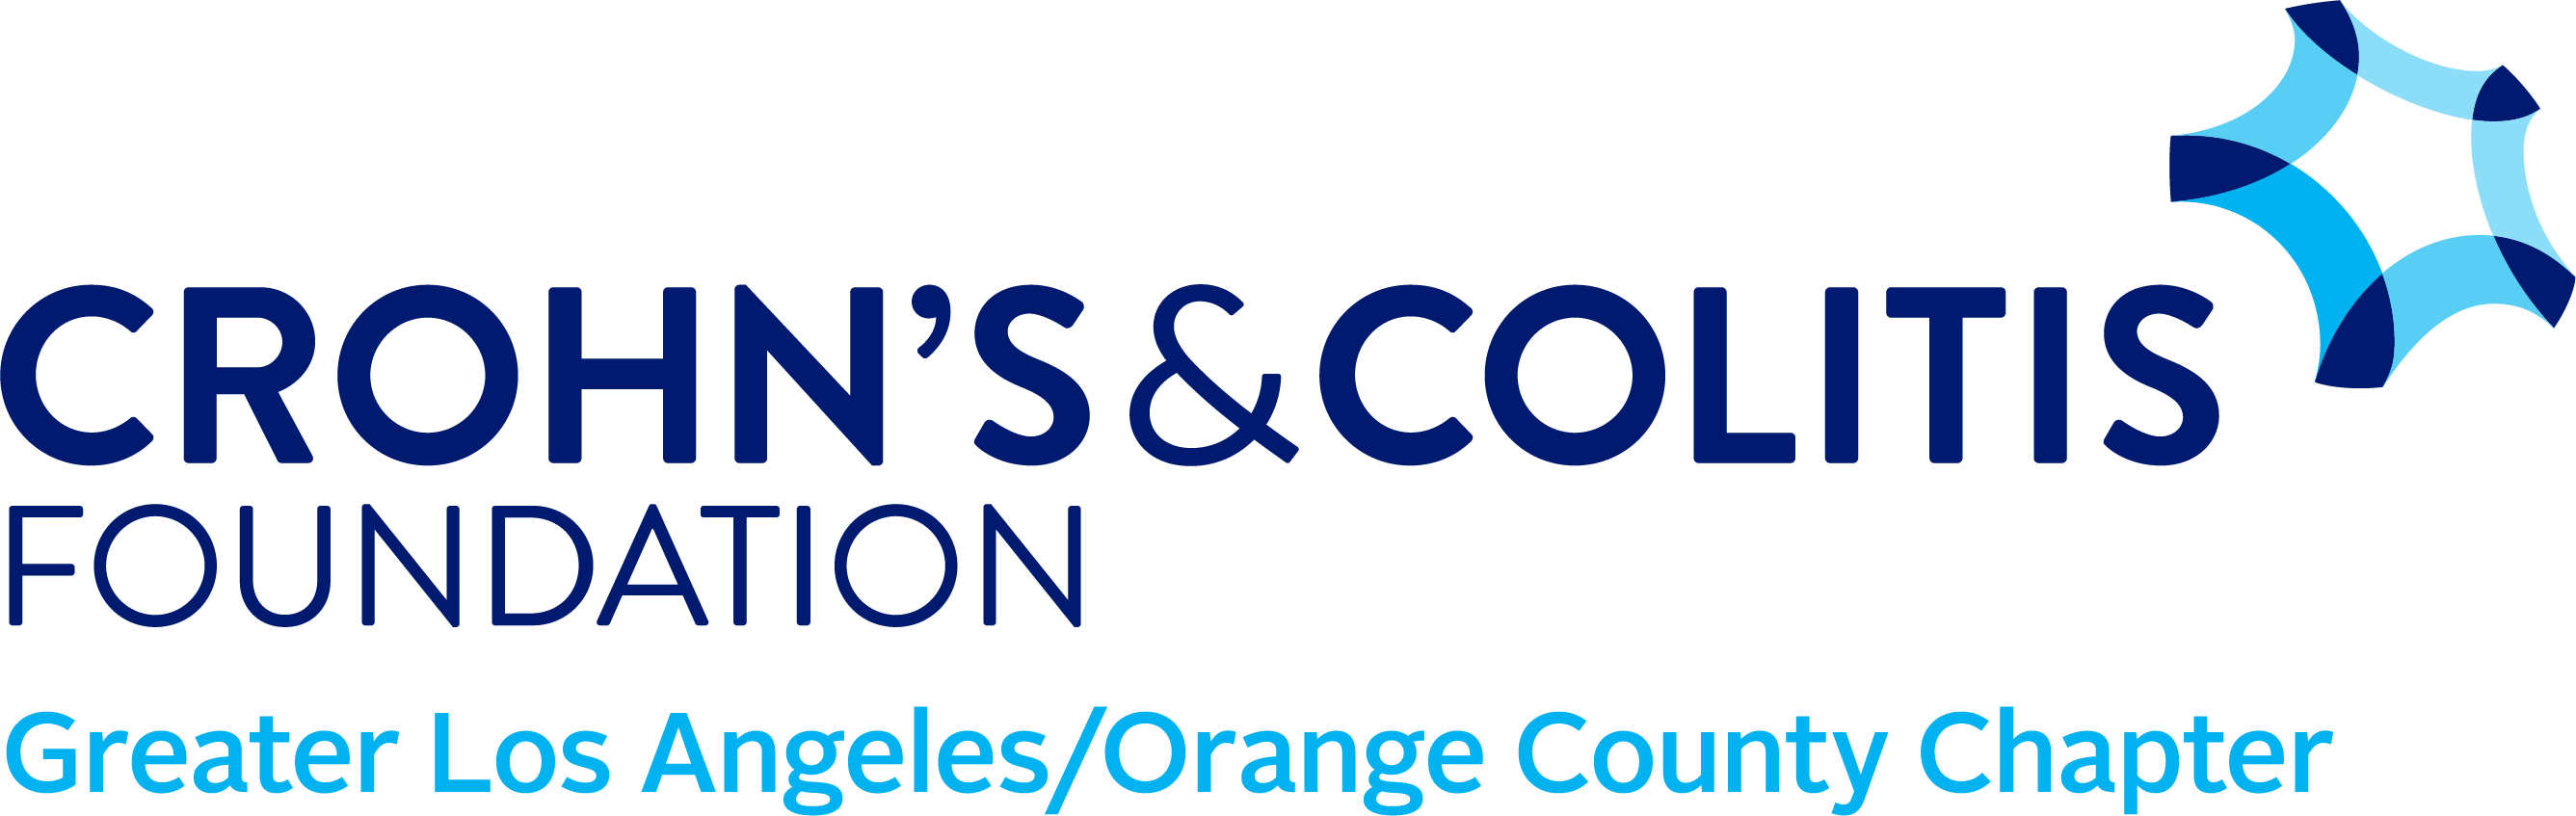 Crohns&Colitis Foundation - Greater Los Angeles/Orange County Chapter